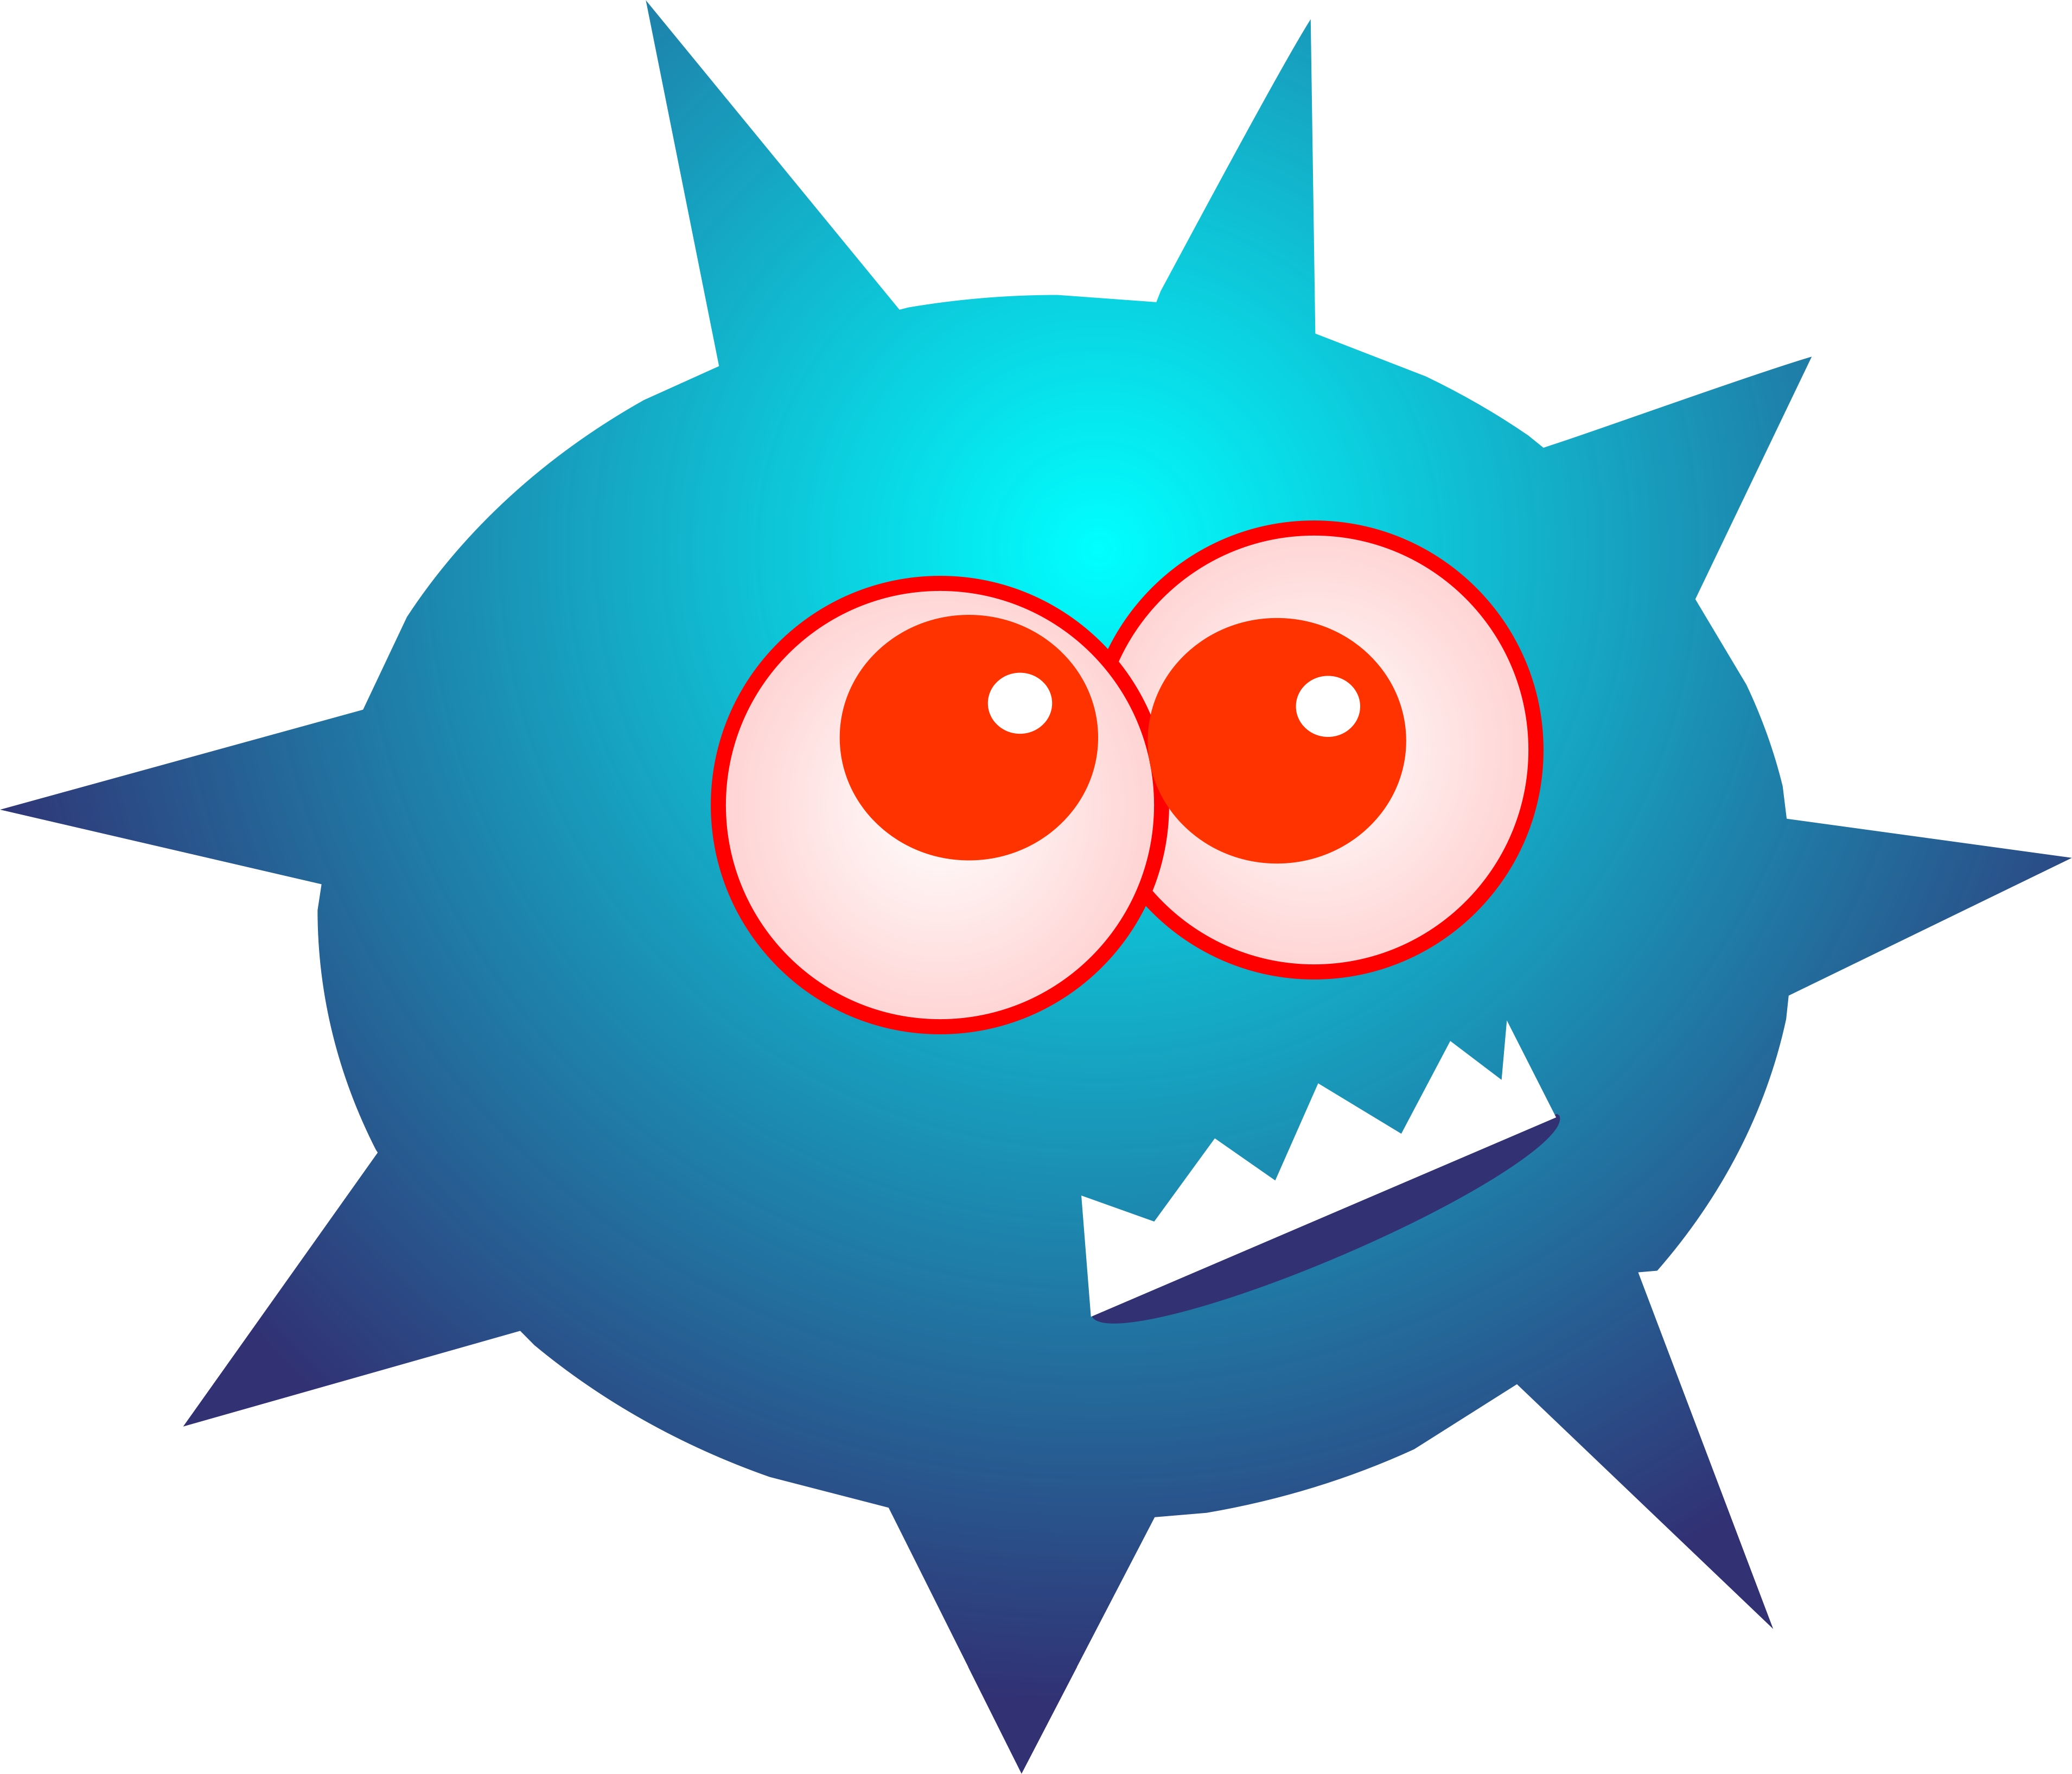 free clipart images germs - photo #25